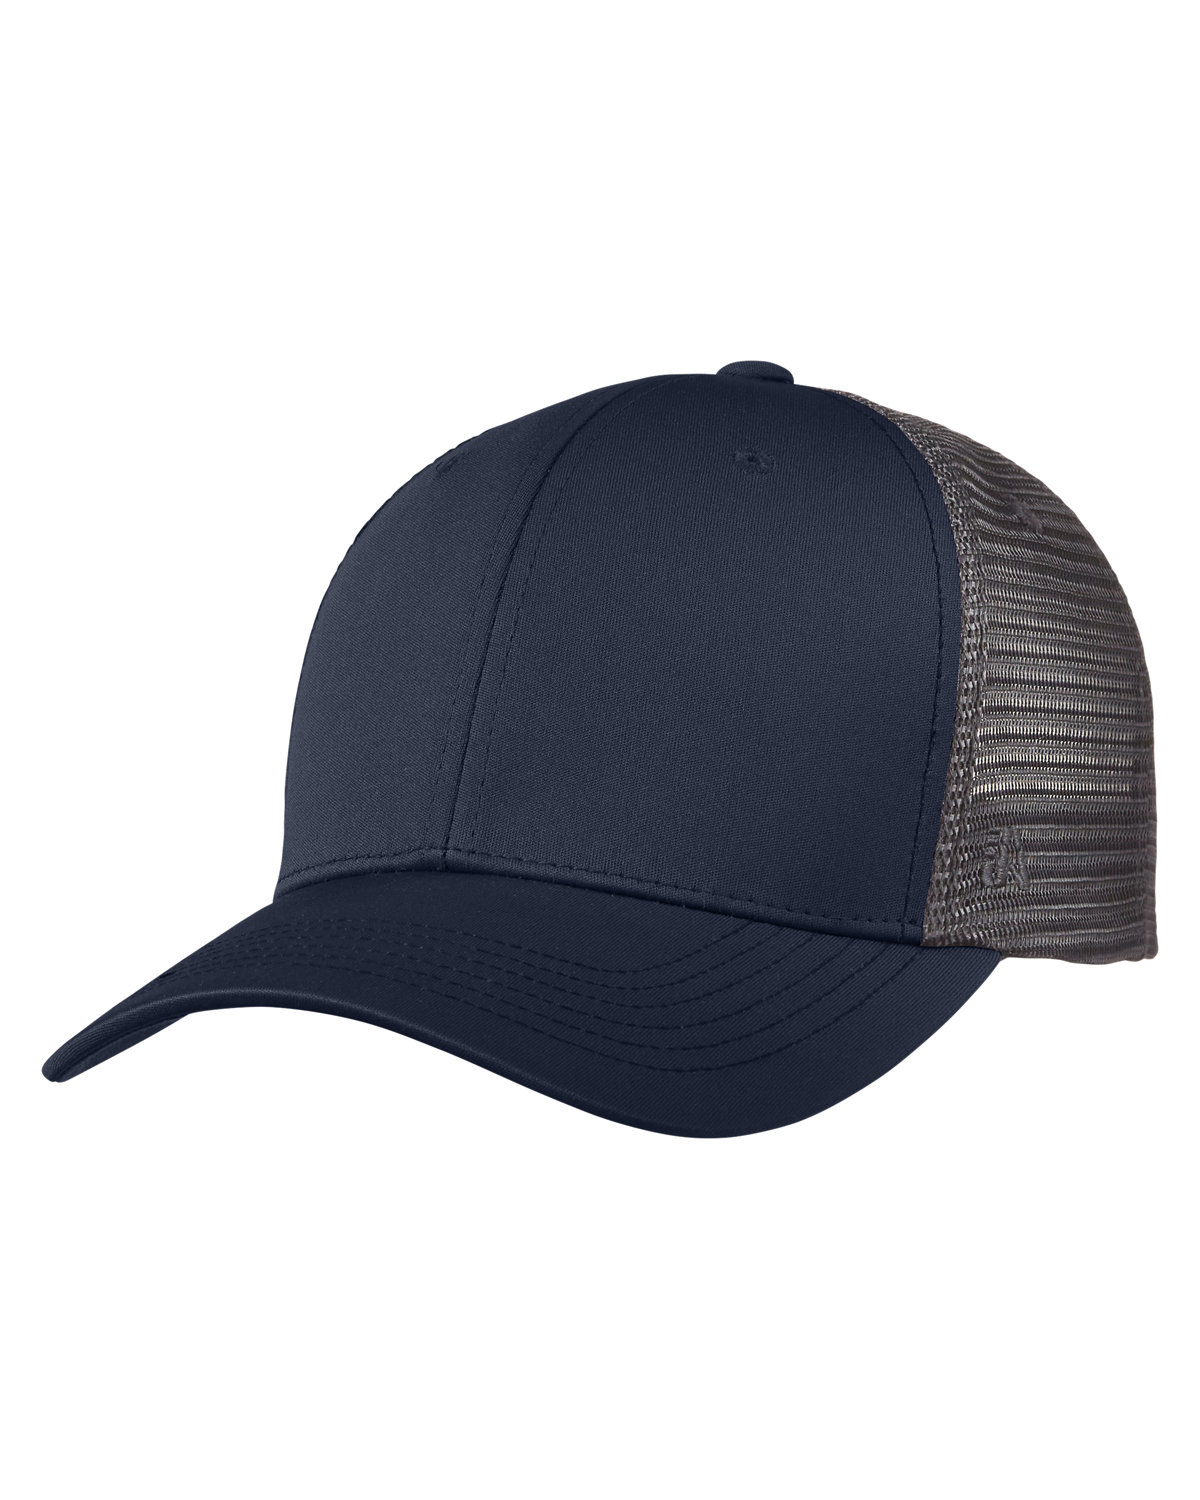 click to view NAVY/ CHARCOAL